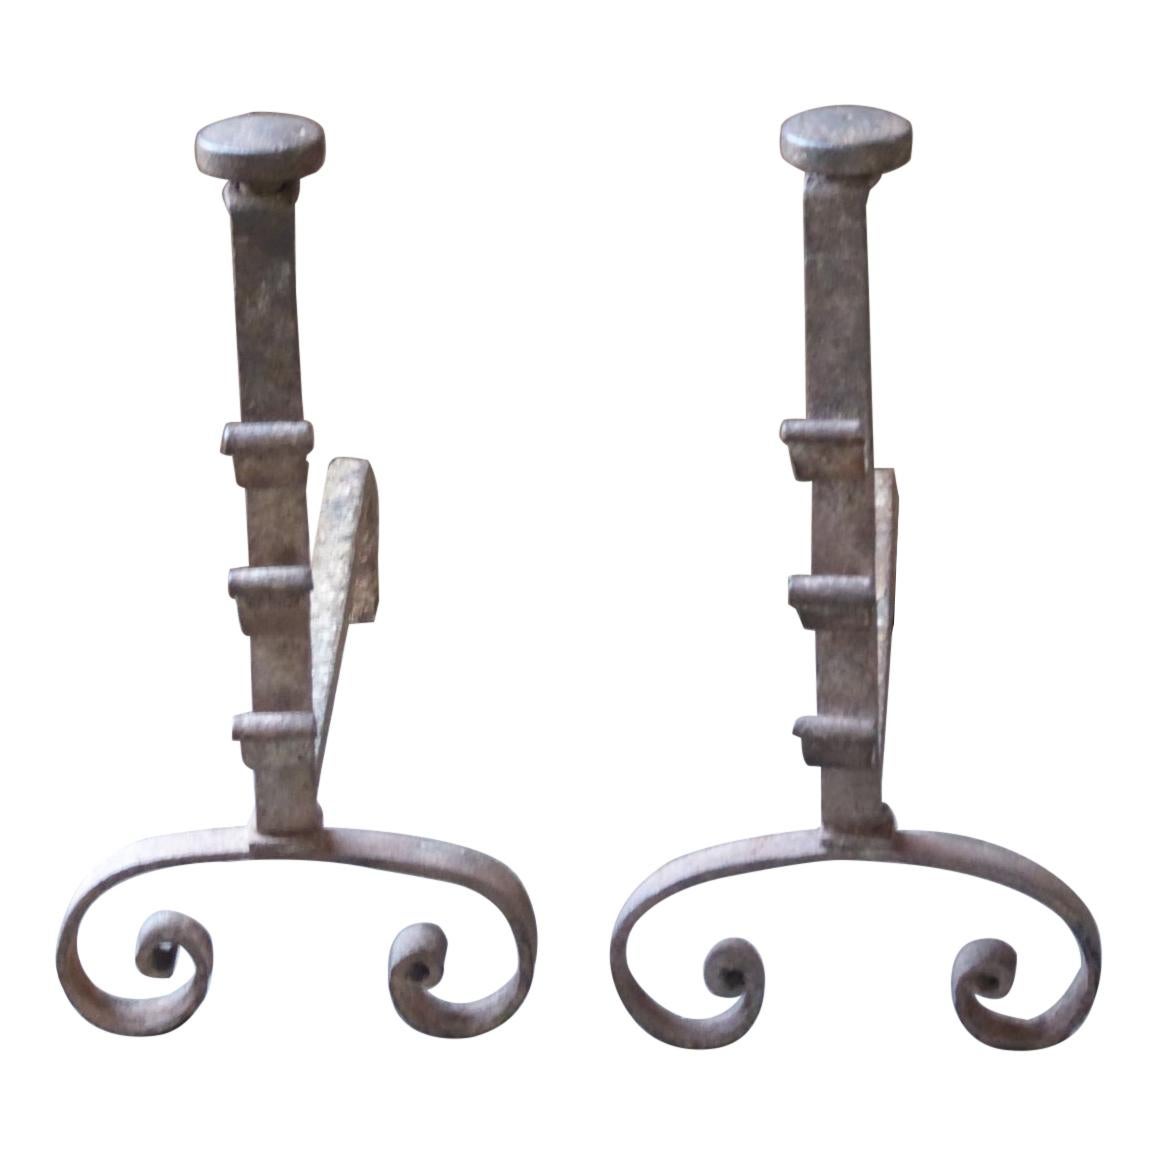 18th-19th century French Gothic style andirons made of wrought iron.







 